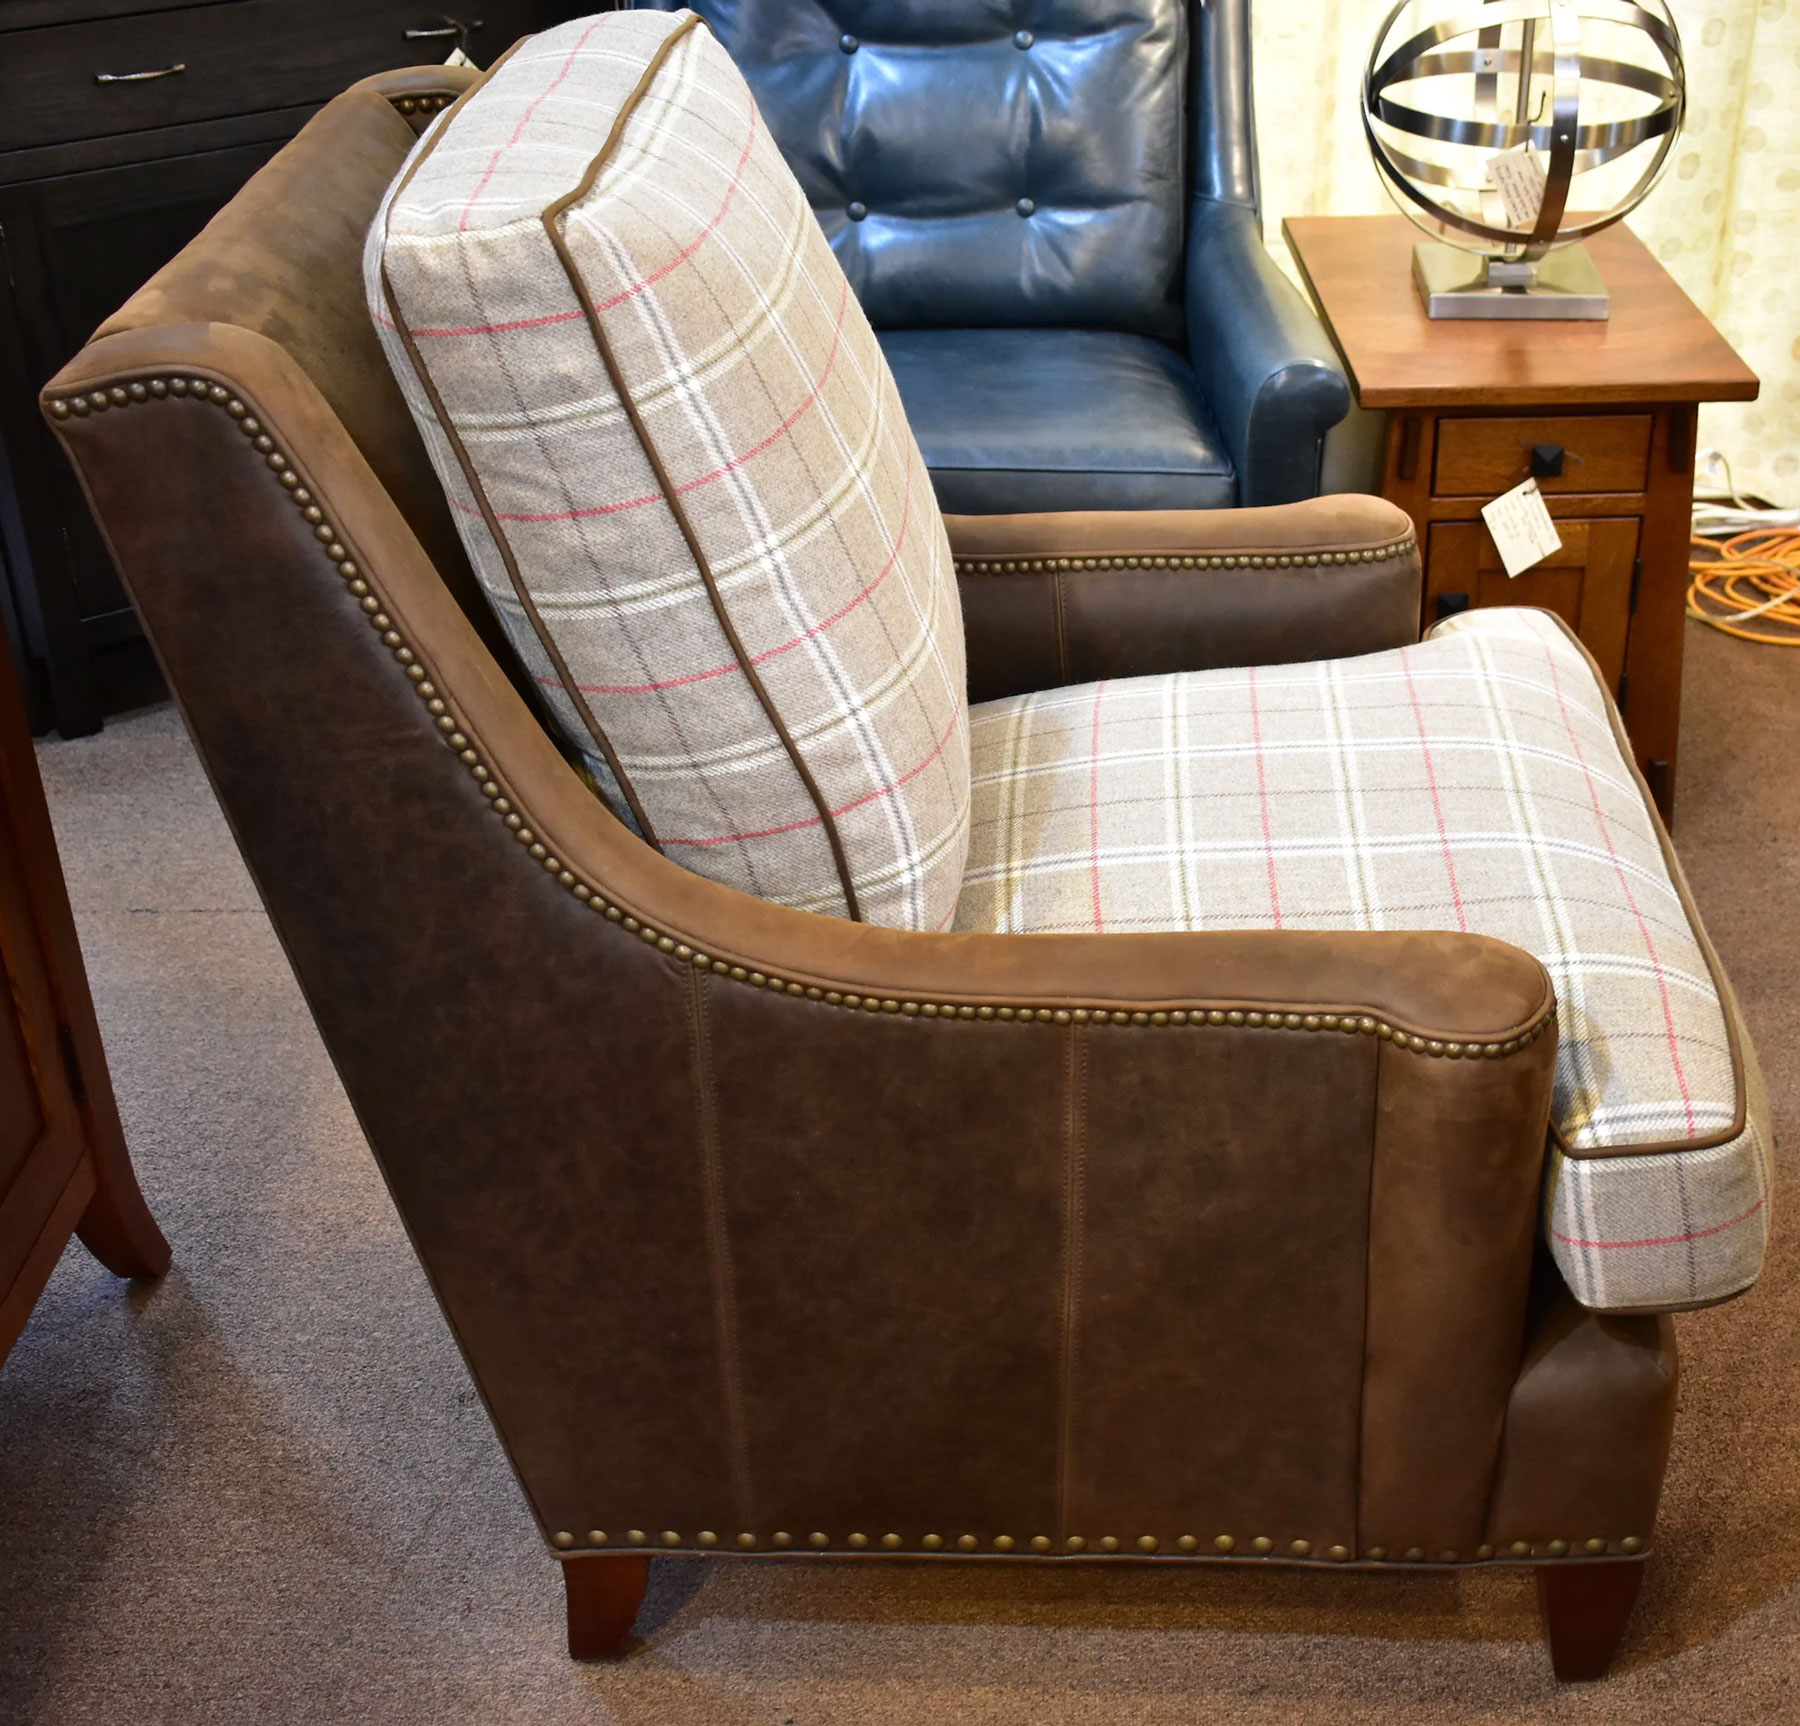 Our House 550 Lounge Chair in Aged Cigar Leather with Cushions in Novelty Fabric